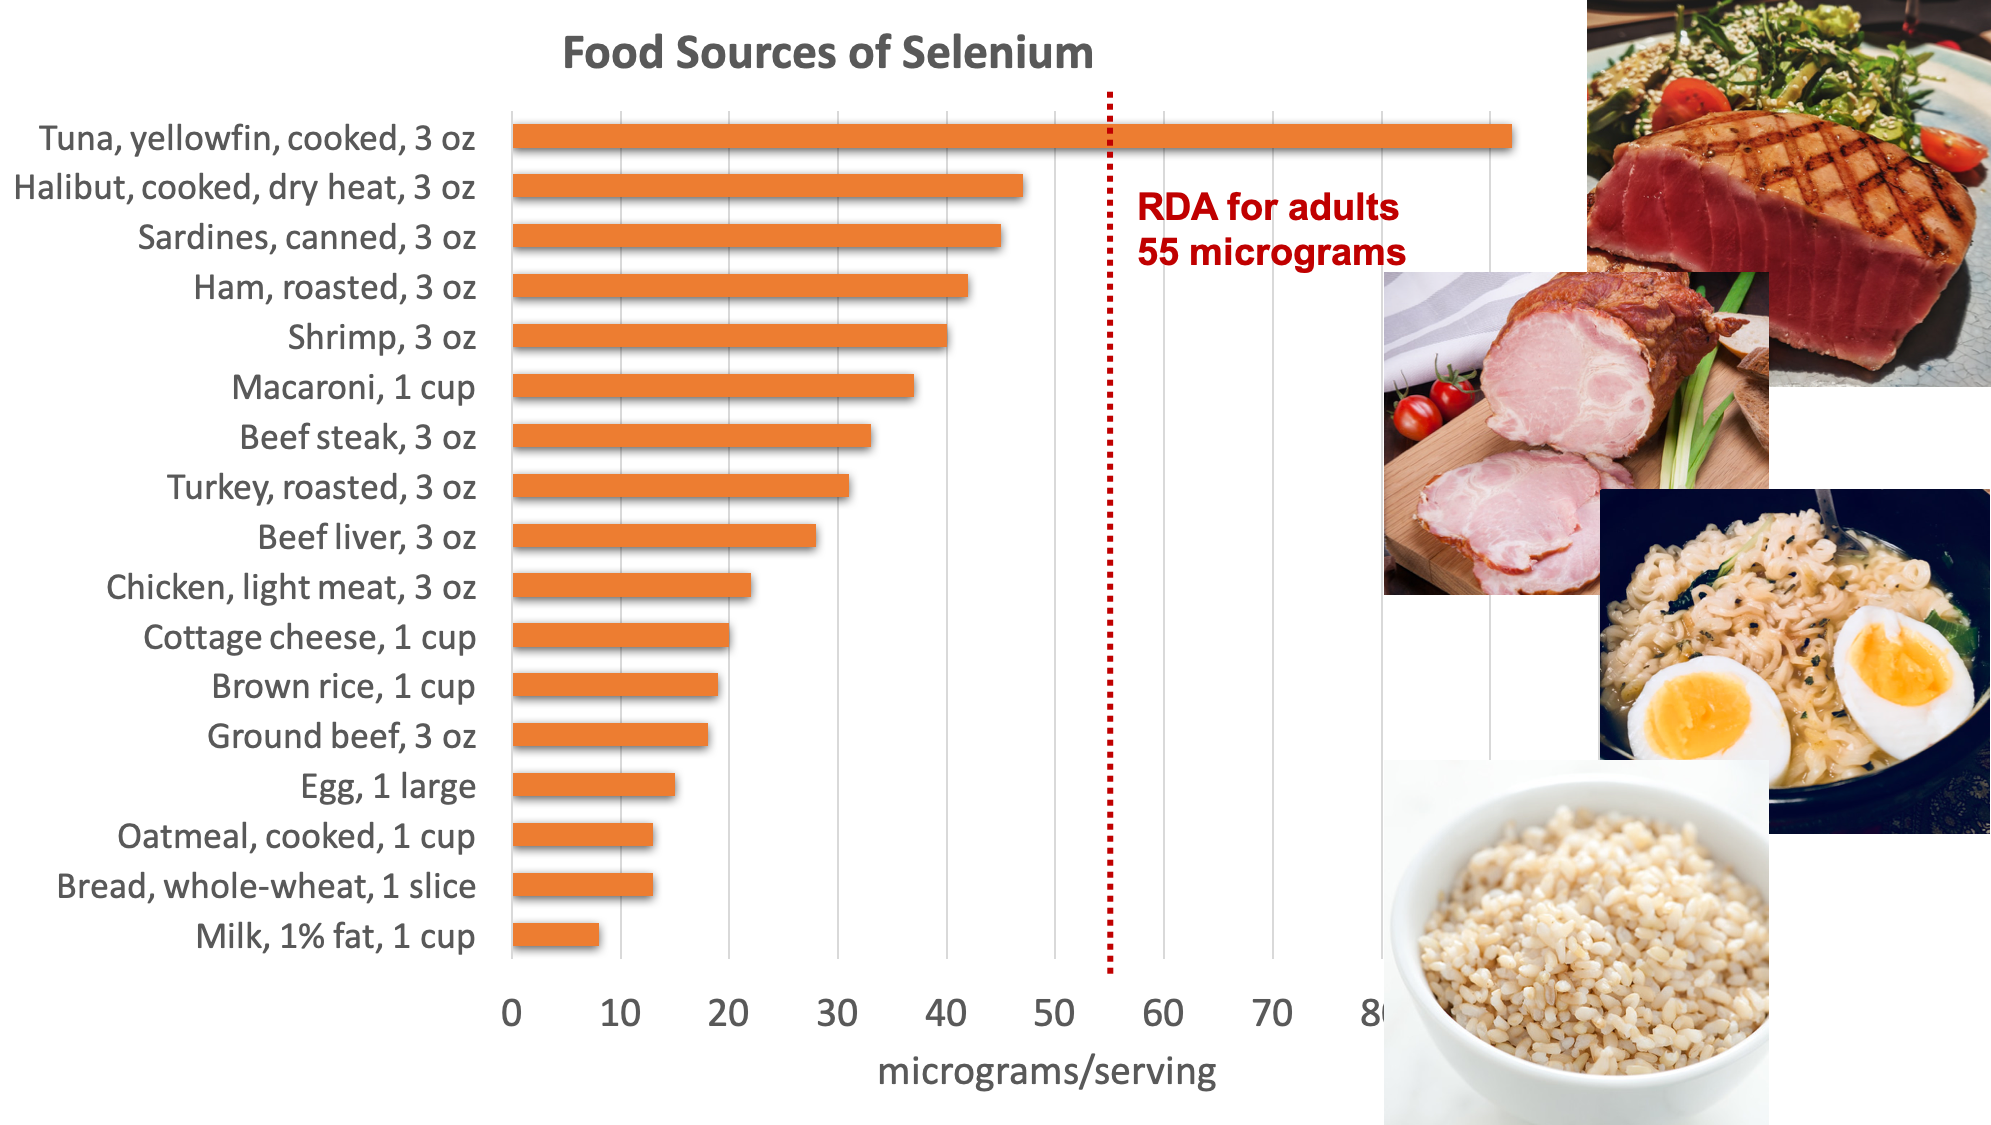 Bar graph showing dietary sources of selenium compared with the RDA for adults of 55 micrograms per day. Top sources include fish; meats such as ham, beef steak, turkey, and chicken; cottage cheese, pasta, eggs, brown rice, oatmeal, whole wheat bread, and milk.